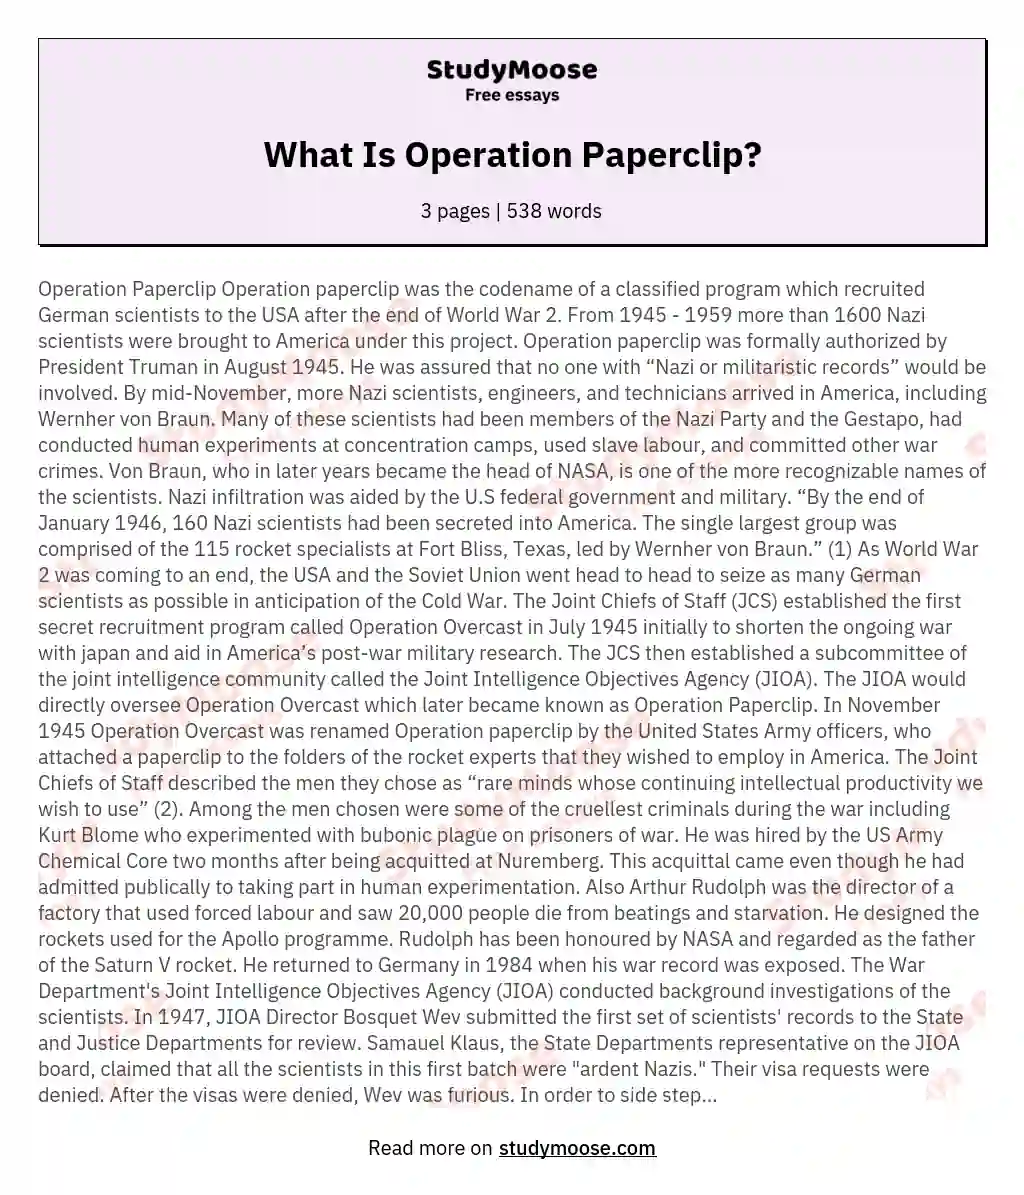 What Is Operation Paperclip? essay